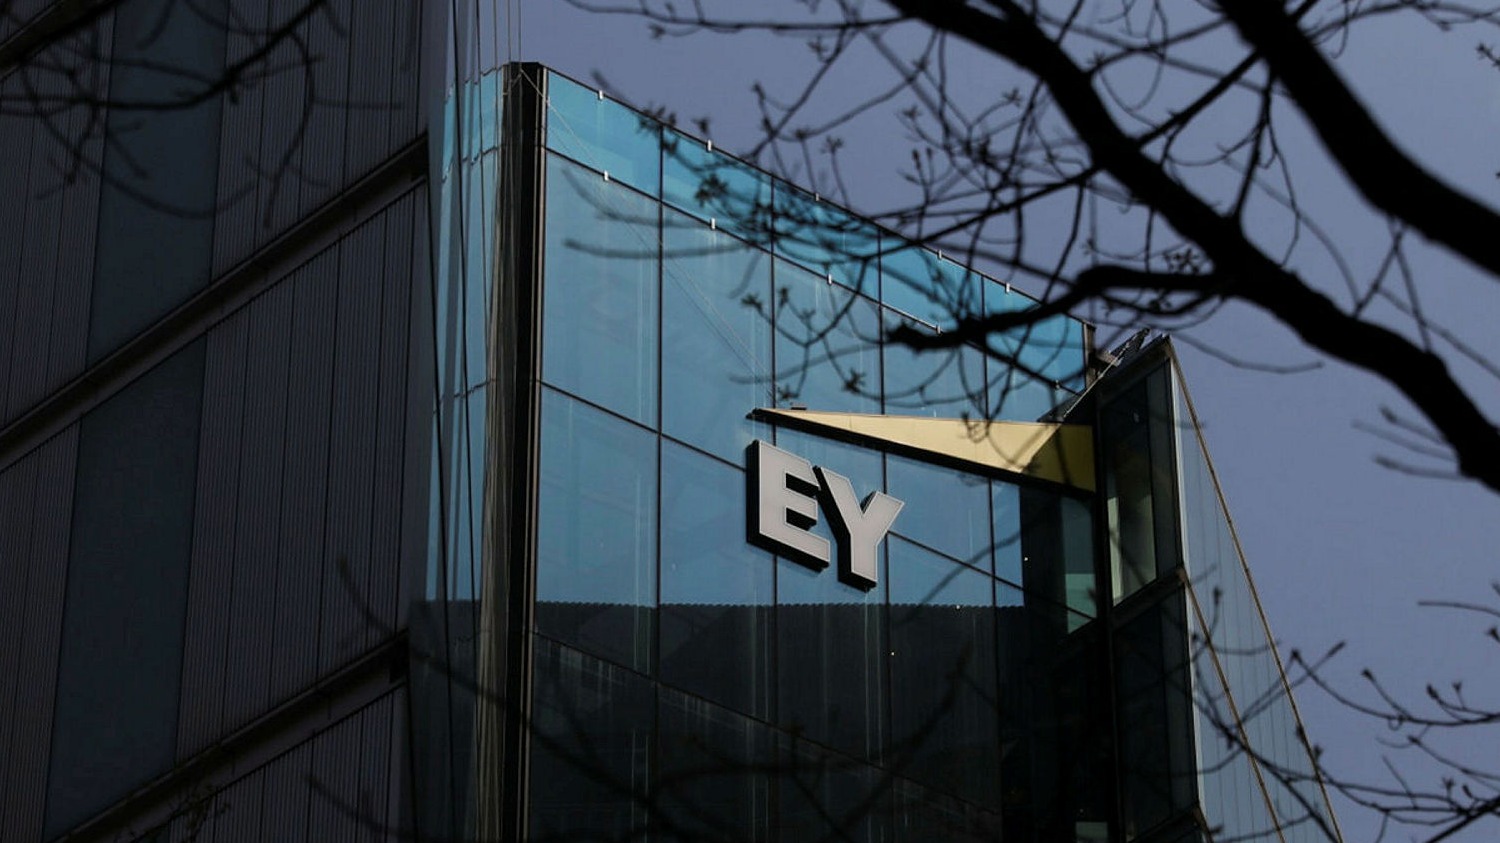 Ey Plans Global Audit Spin Off In Drastic Big Four Shake Up Financial Times 4861